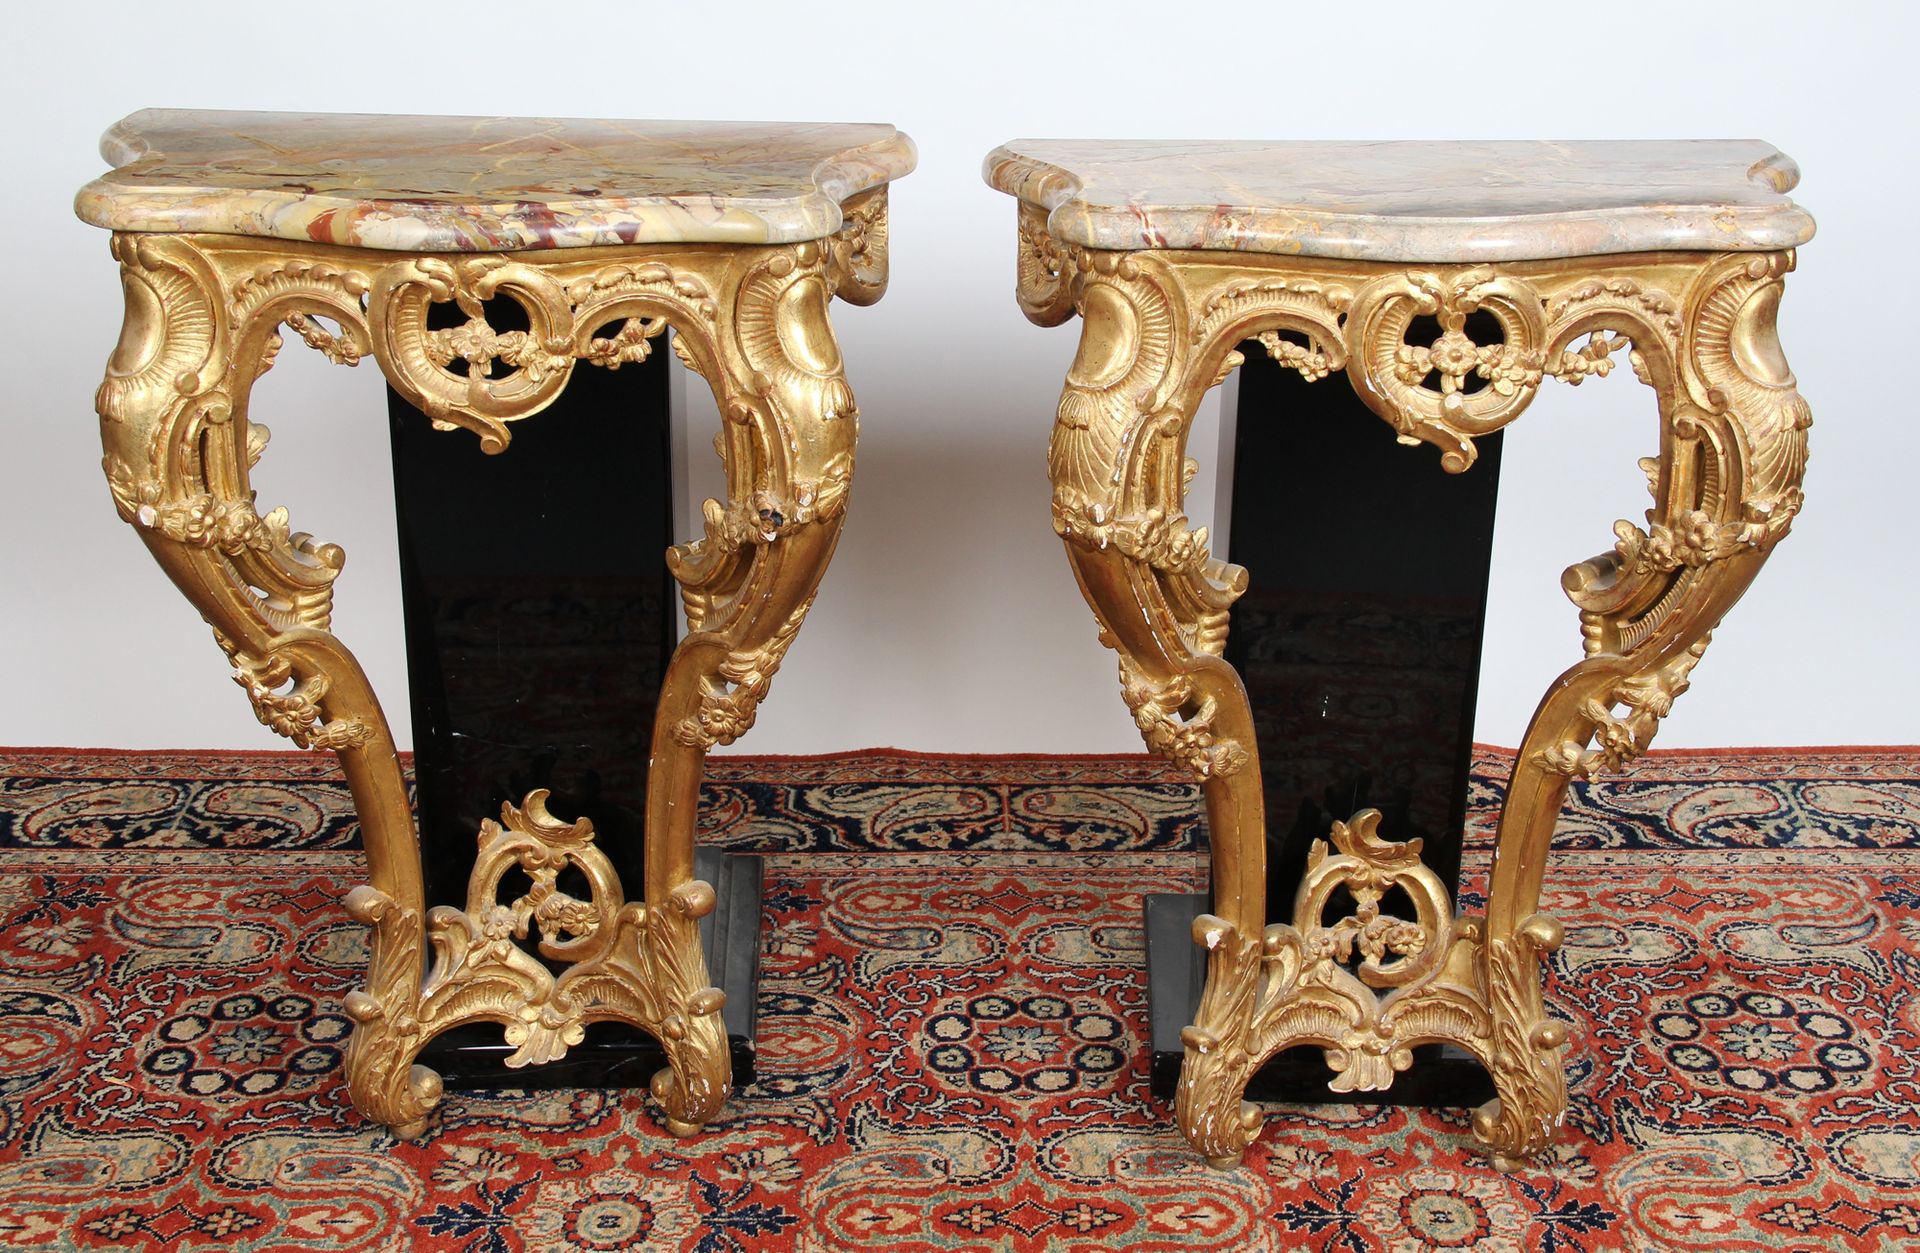 Null PAIR OF ENTRE-DEUX CONSOLES

in openwork wood, carved and gilded with rocai&hellip;